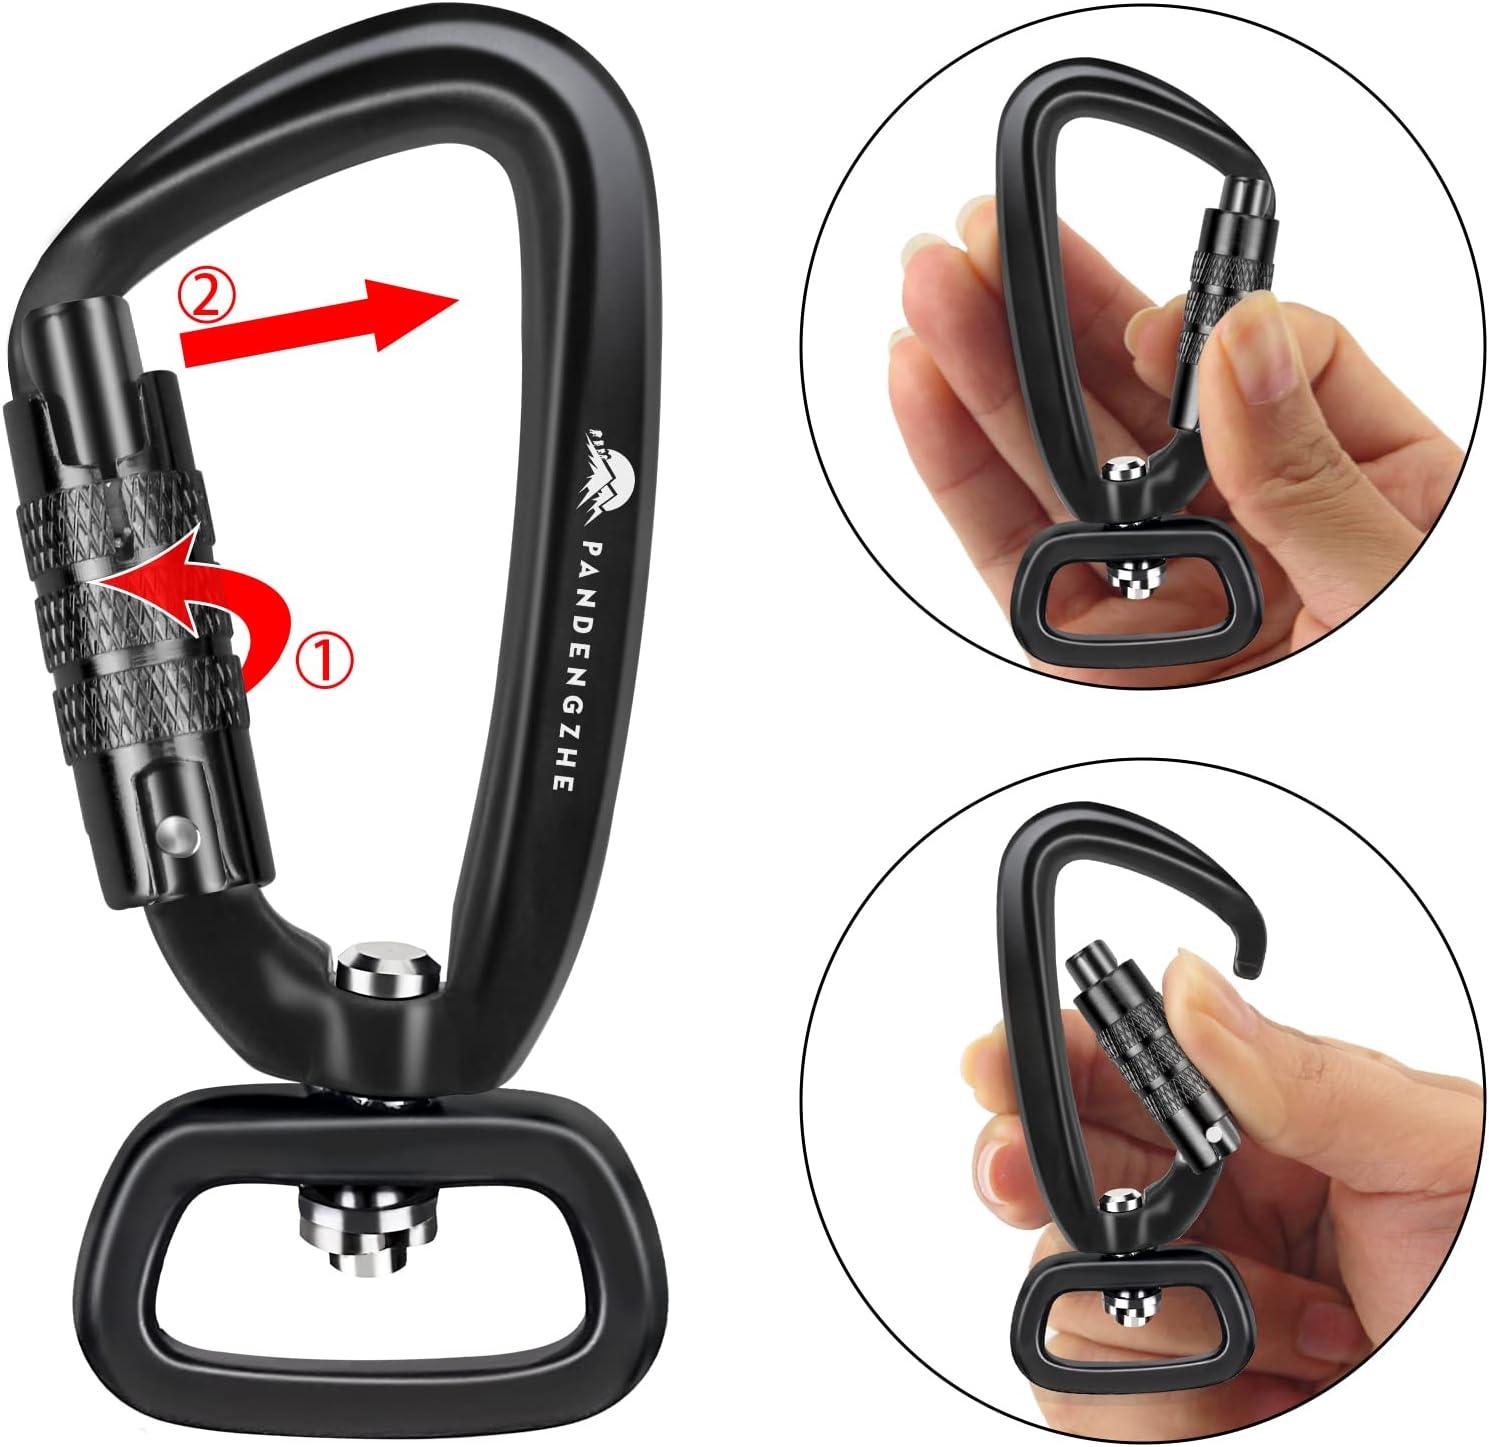 PANDENGZHE Locking Carabiner Clips 2.5 with Swivel Clasp for Securing Pets Dog  Leash Harness Camping Hiking Backpack Outdoors Gym (2 Pack)